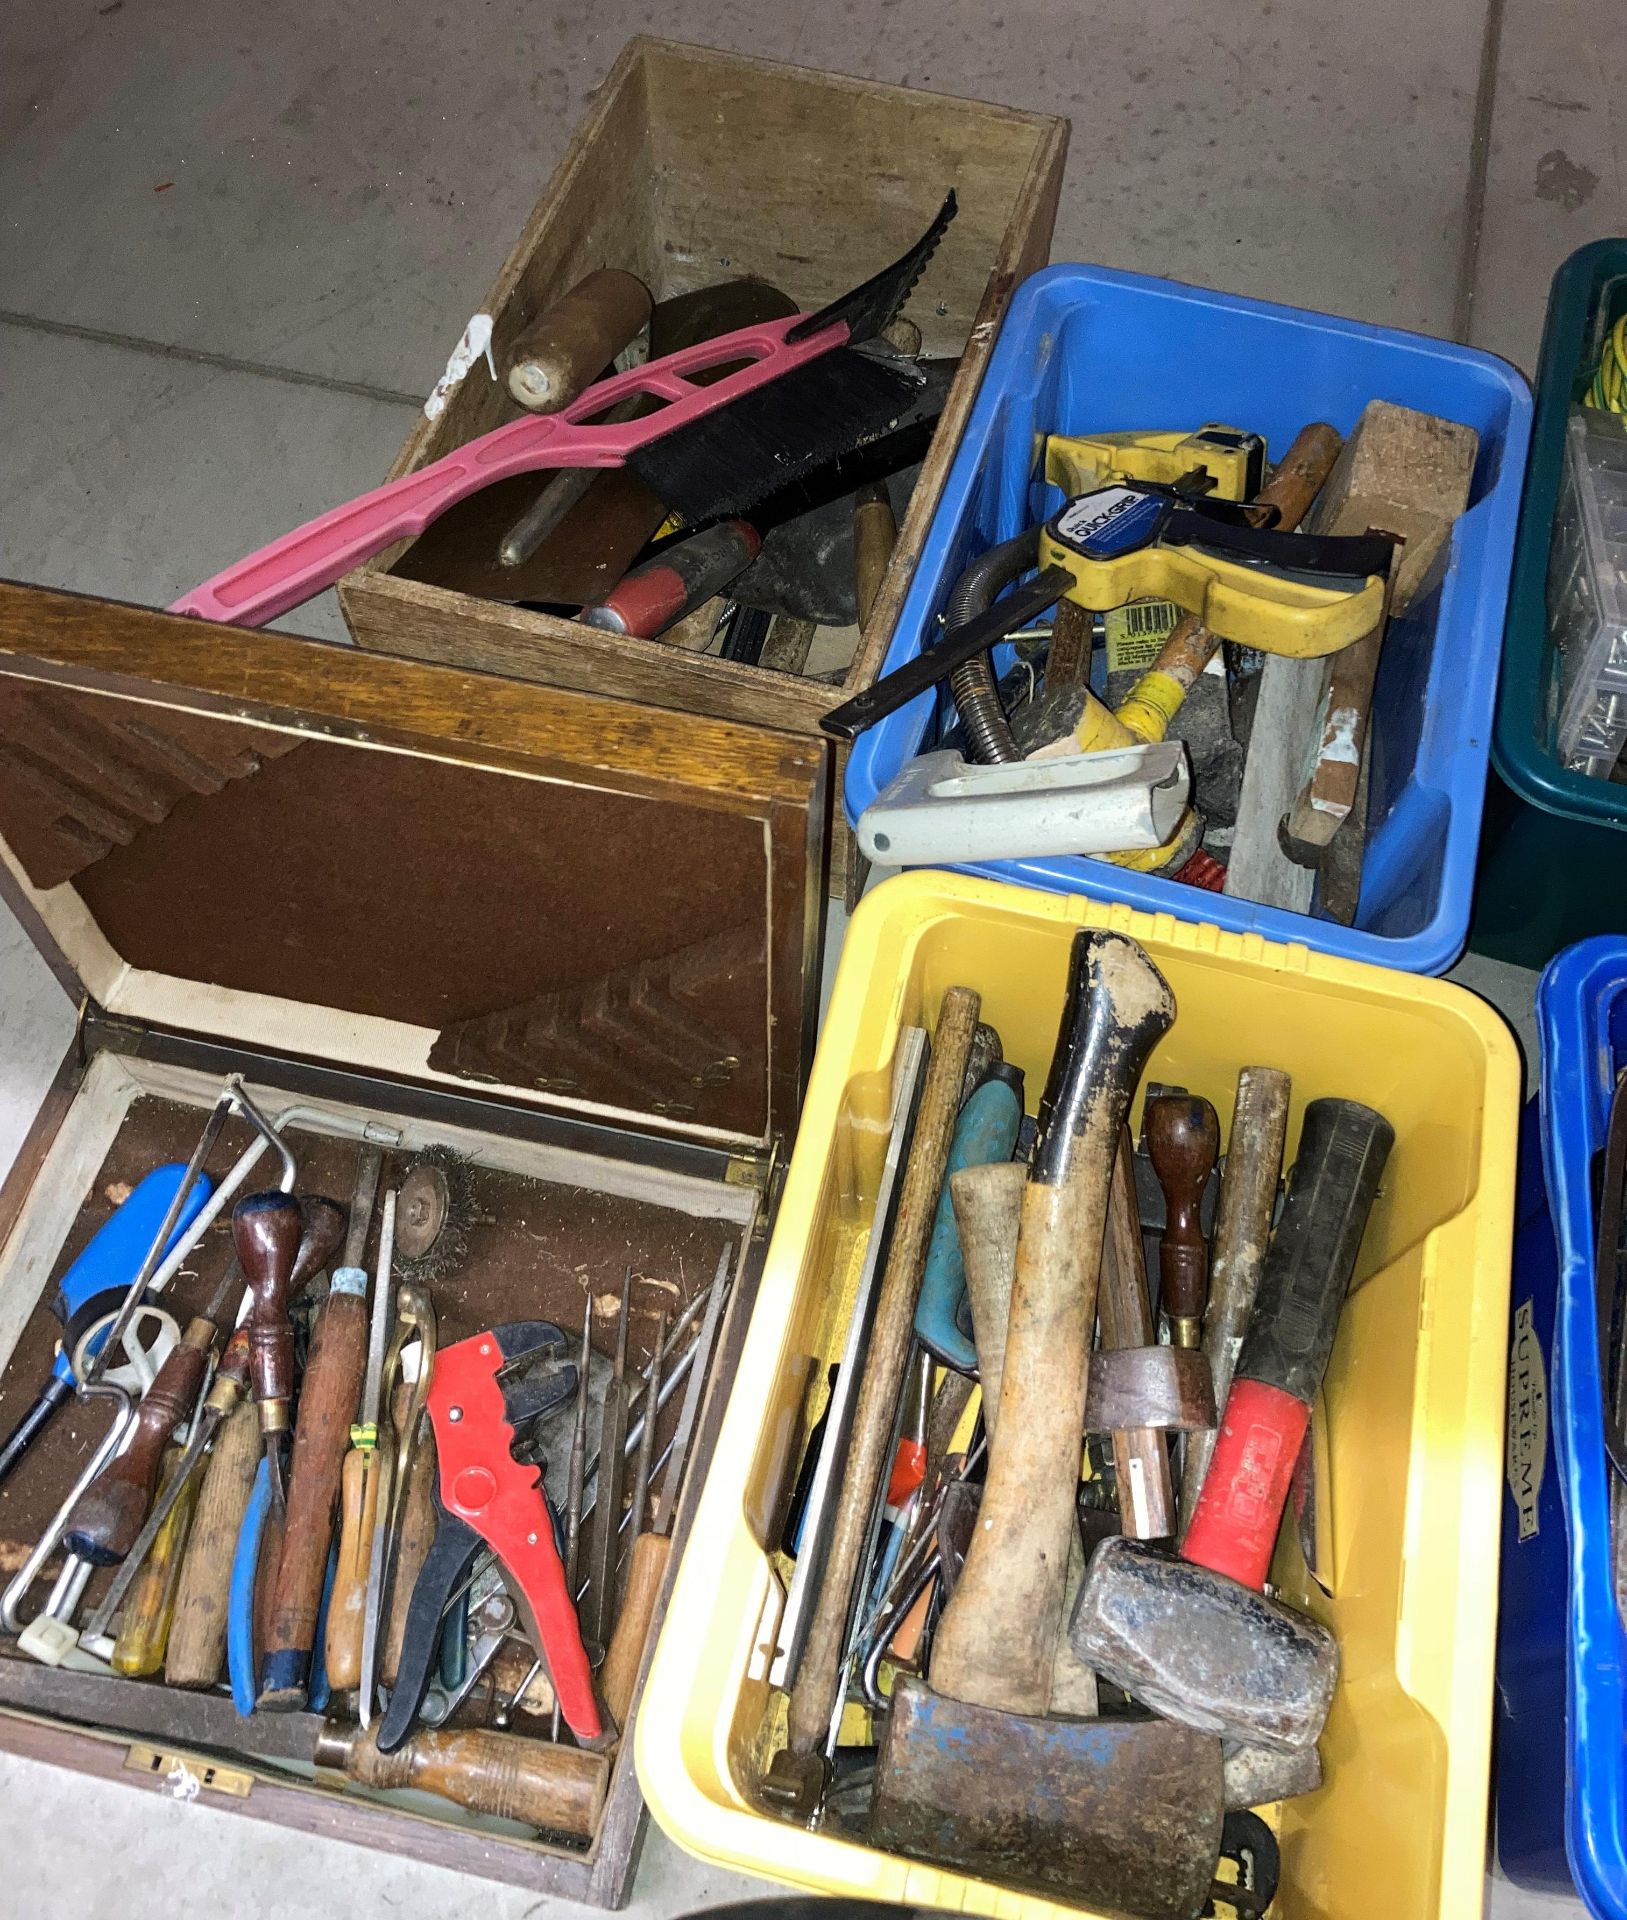 Contents to 8 x boxes and tool box - assorted hand tools, G-clamps, lump hammers, sockets, screws, - Image 3 of 3